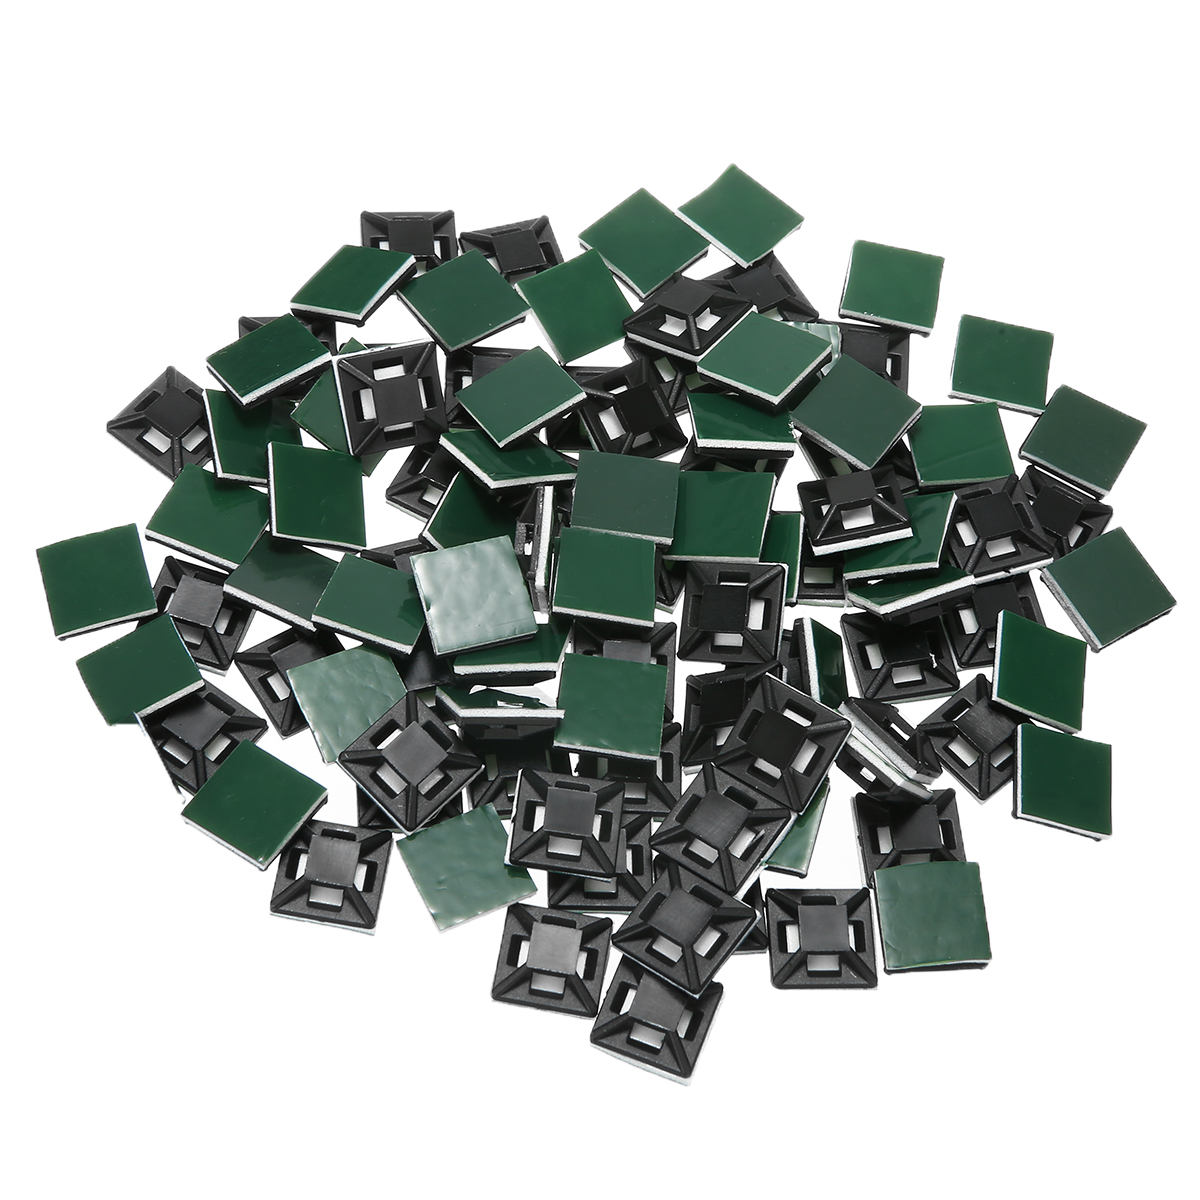 100PCS/Set Green Cable Base Mounts 12.5*12.5mm Self Adhesive Cable Wire Zip Tie Mounts Bases Wall Holder Fixing Seat Clamps